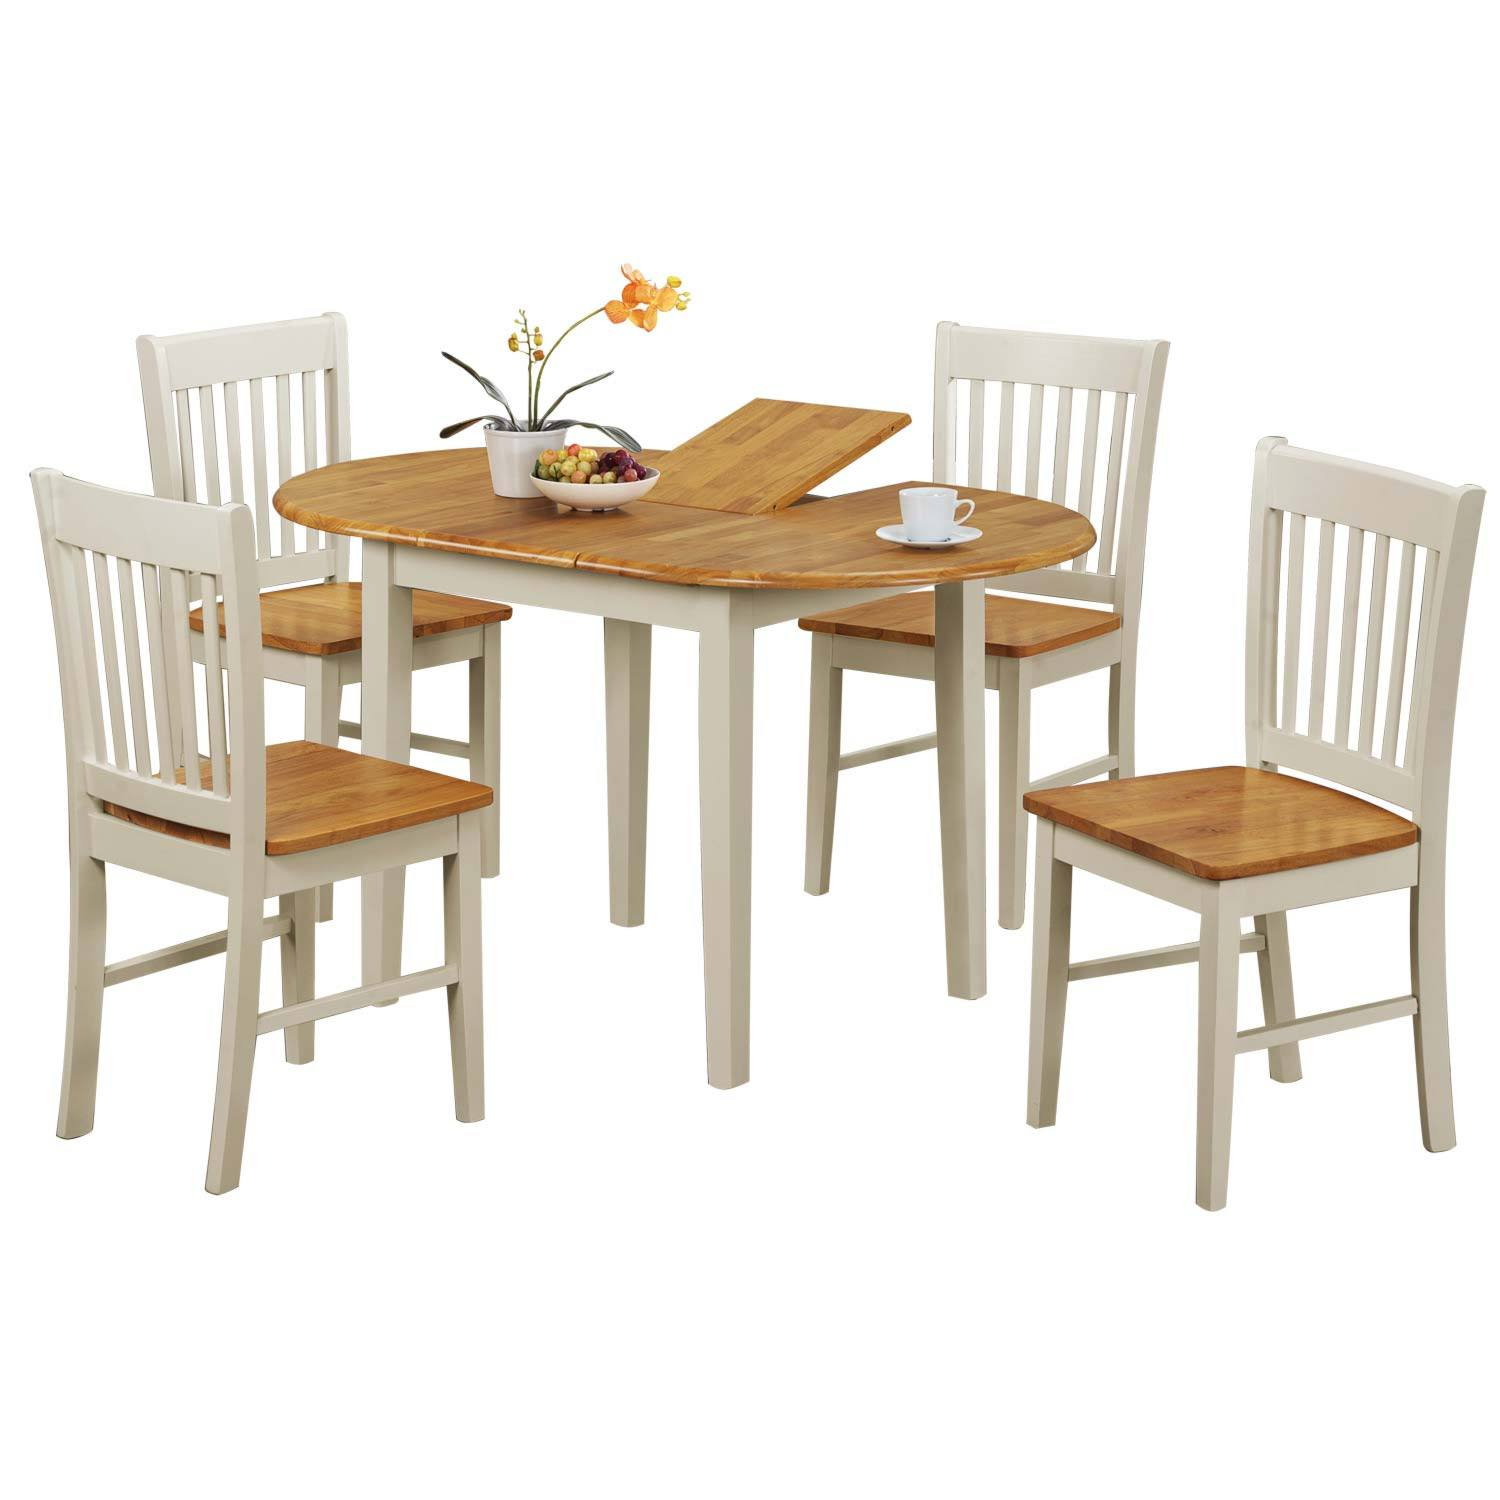 Kentucky Extending Dining Table And Four Chairs Set with regard to dimensions 1500 X 1500